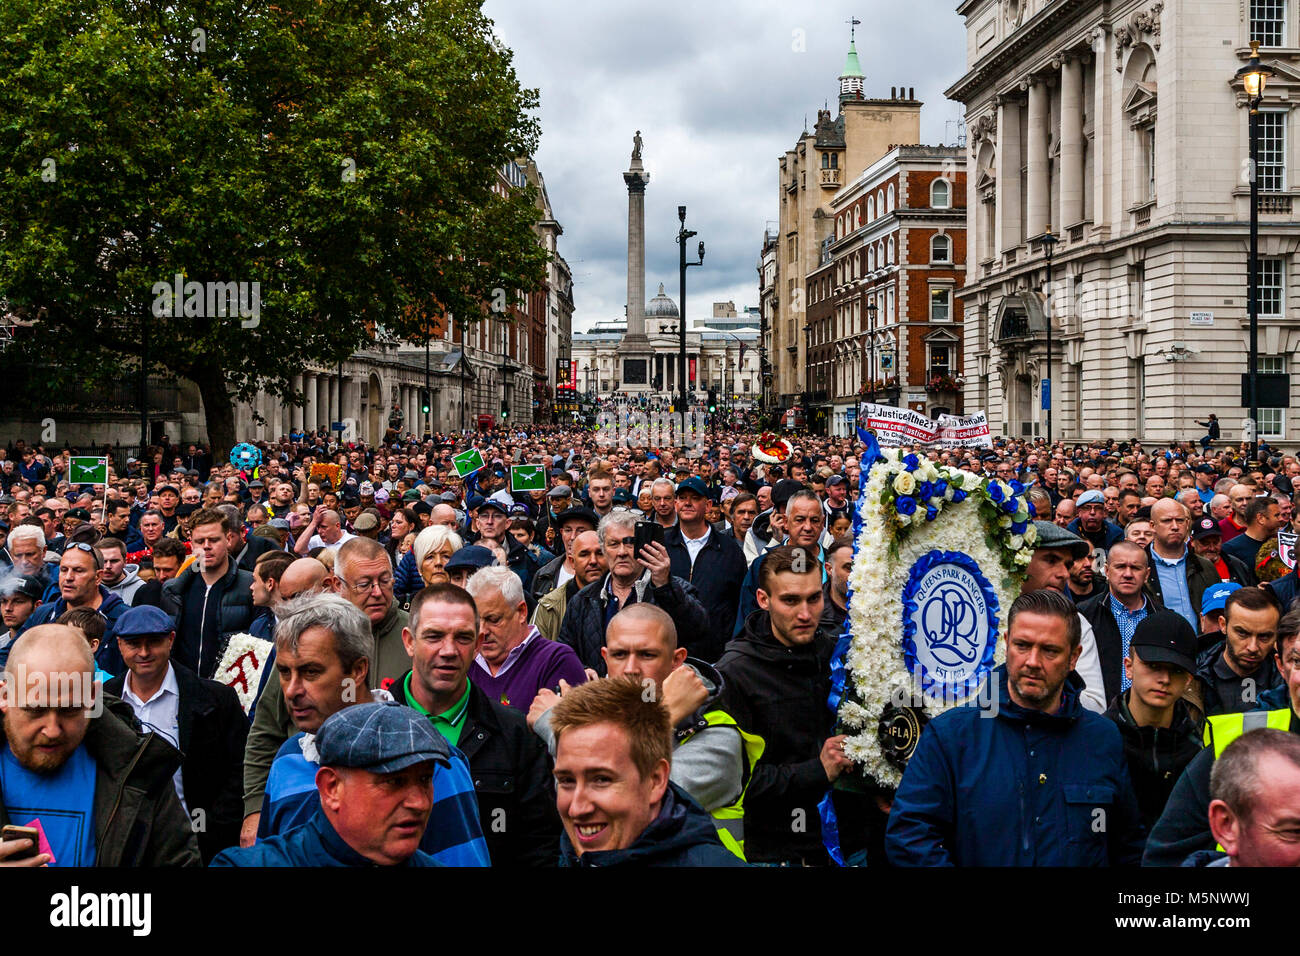 Football fans from across the UK marching against extremism under the banner of the FLA (football lads alliance), Whitehall, London, UK Stock Photo